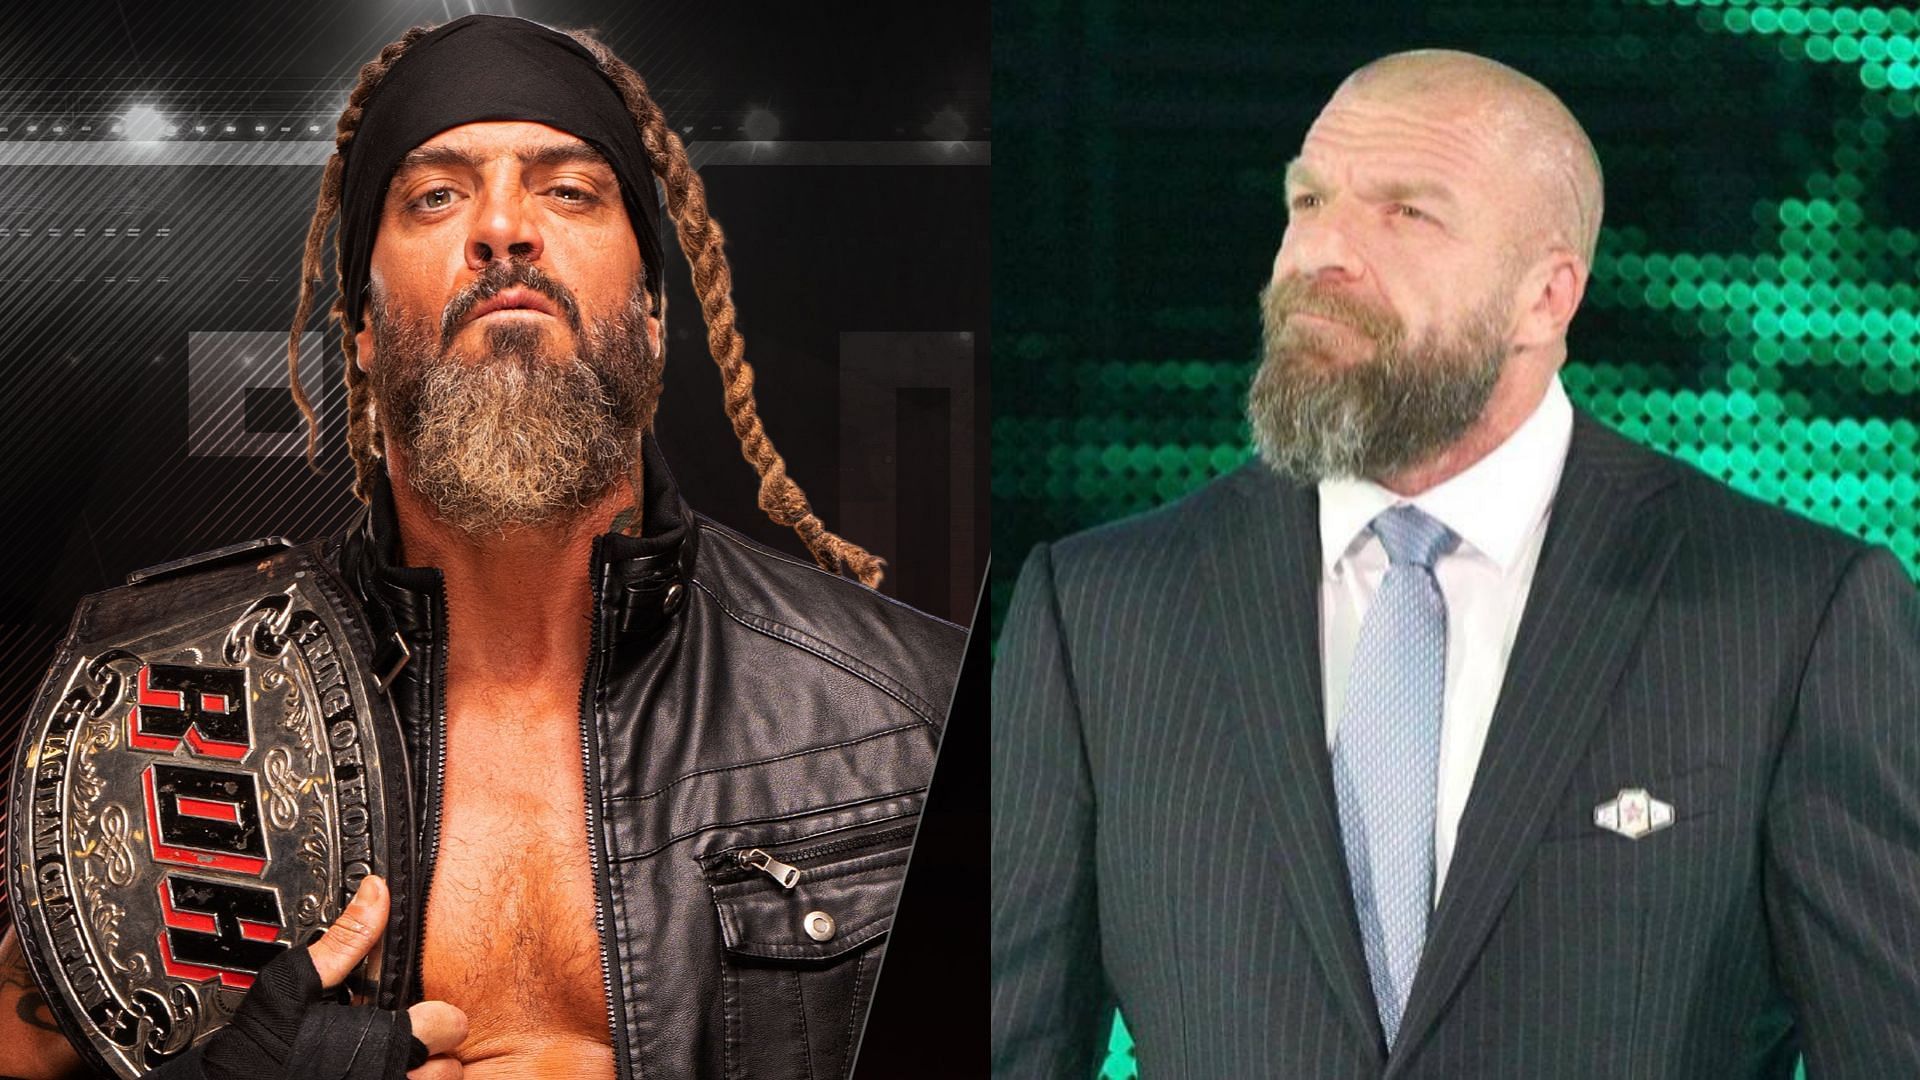 Triple H posted a heartfelt message for Jay Briscoe